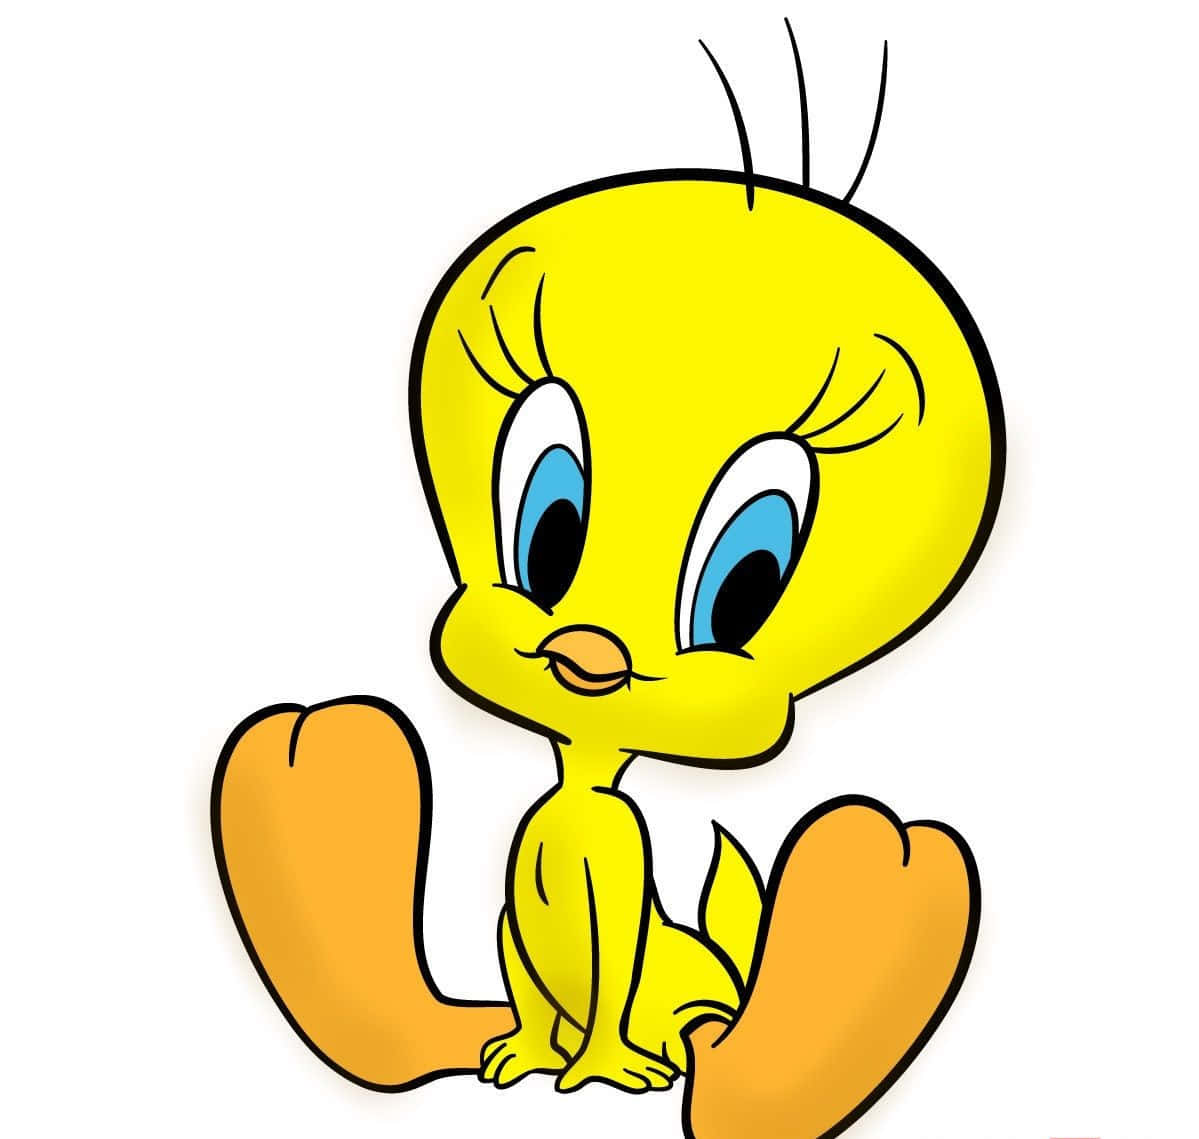 The one and only Tweety Bird!